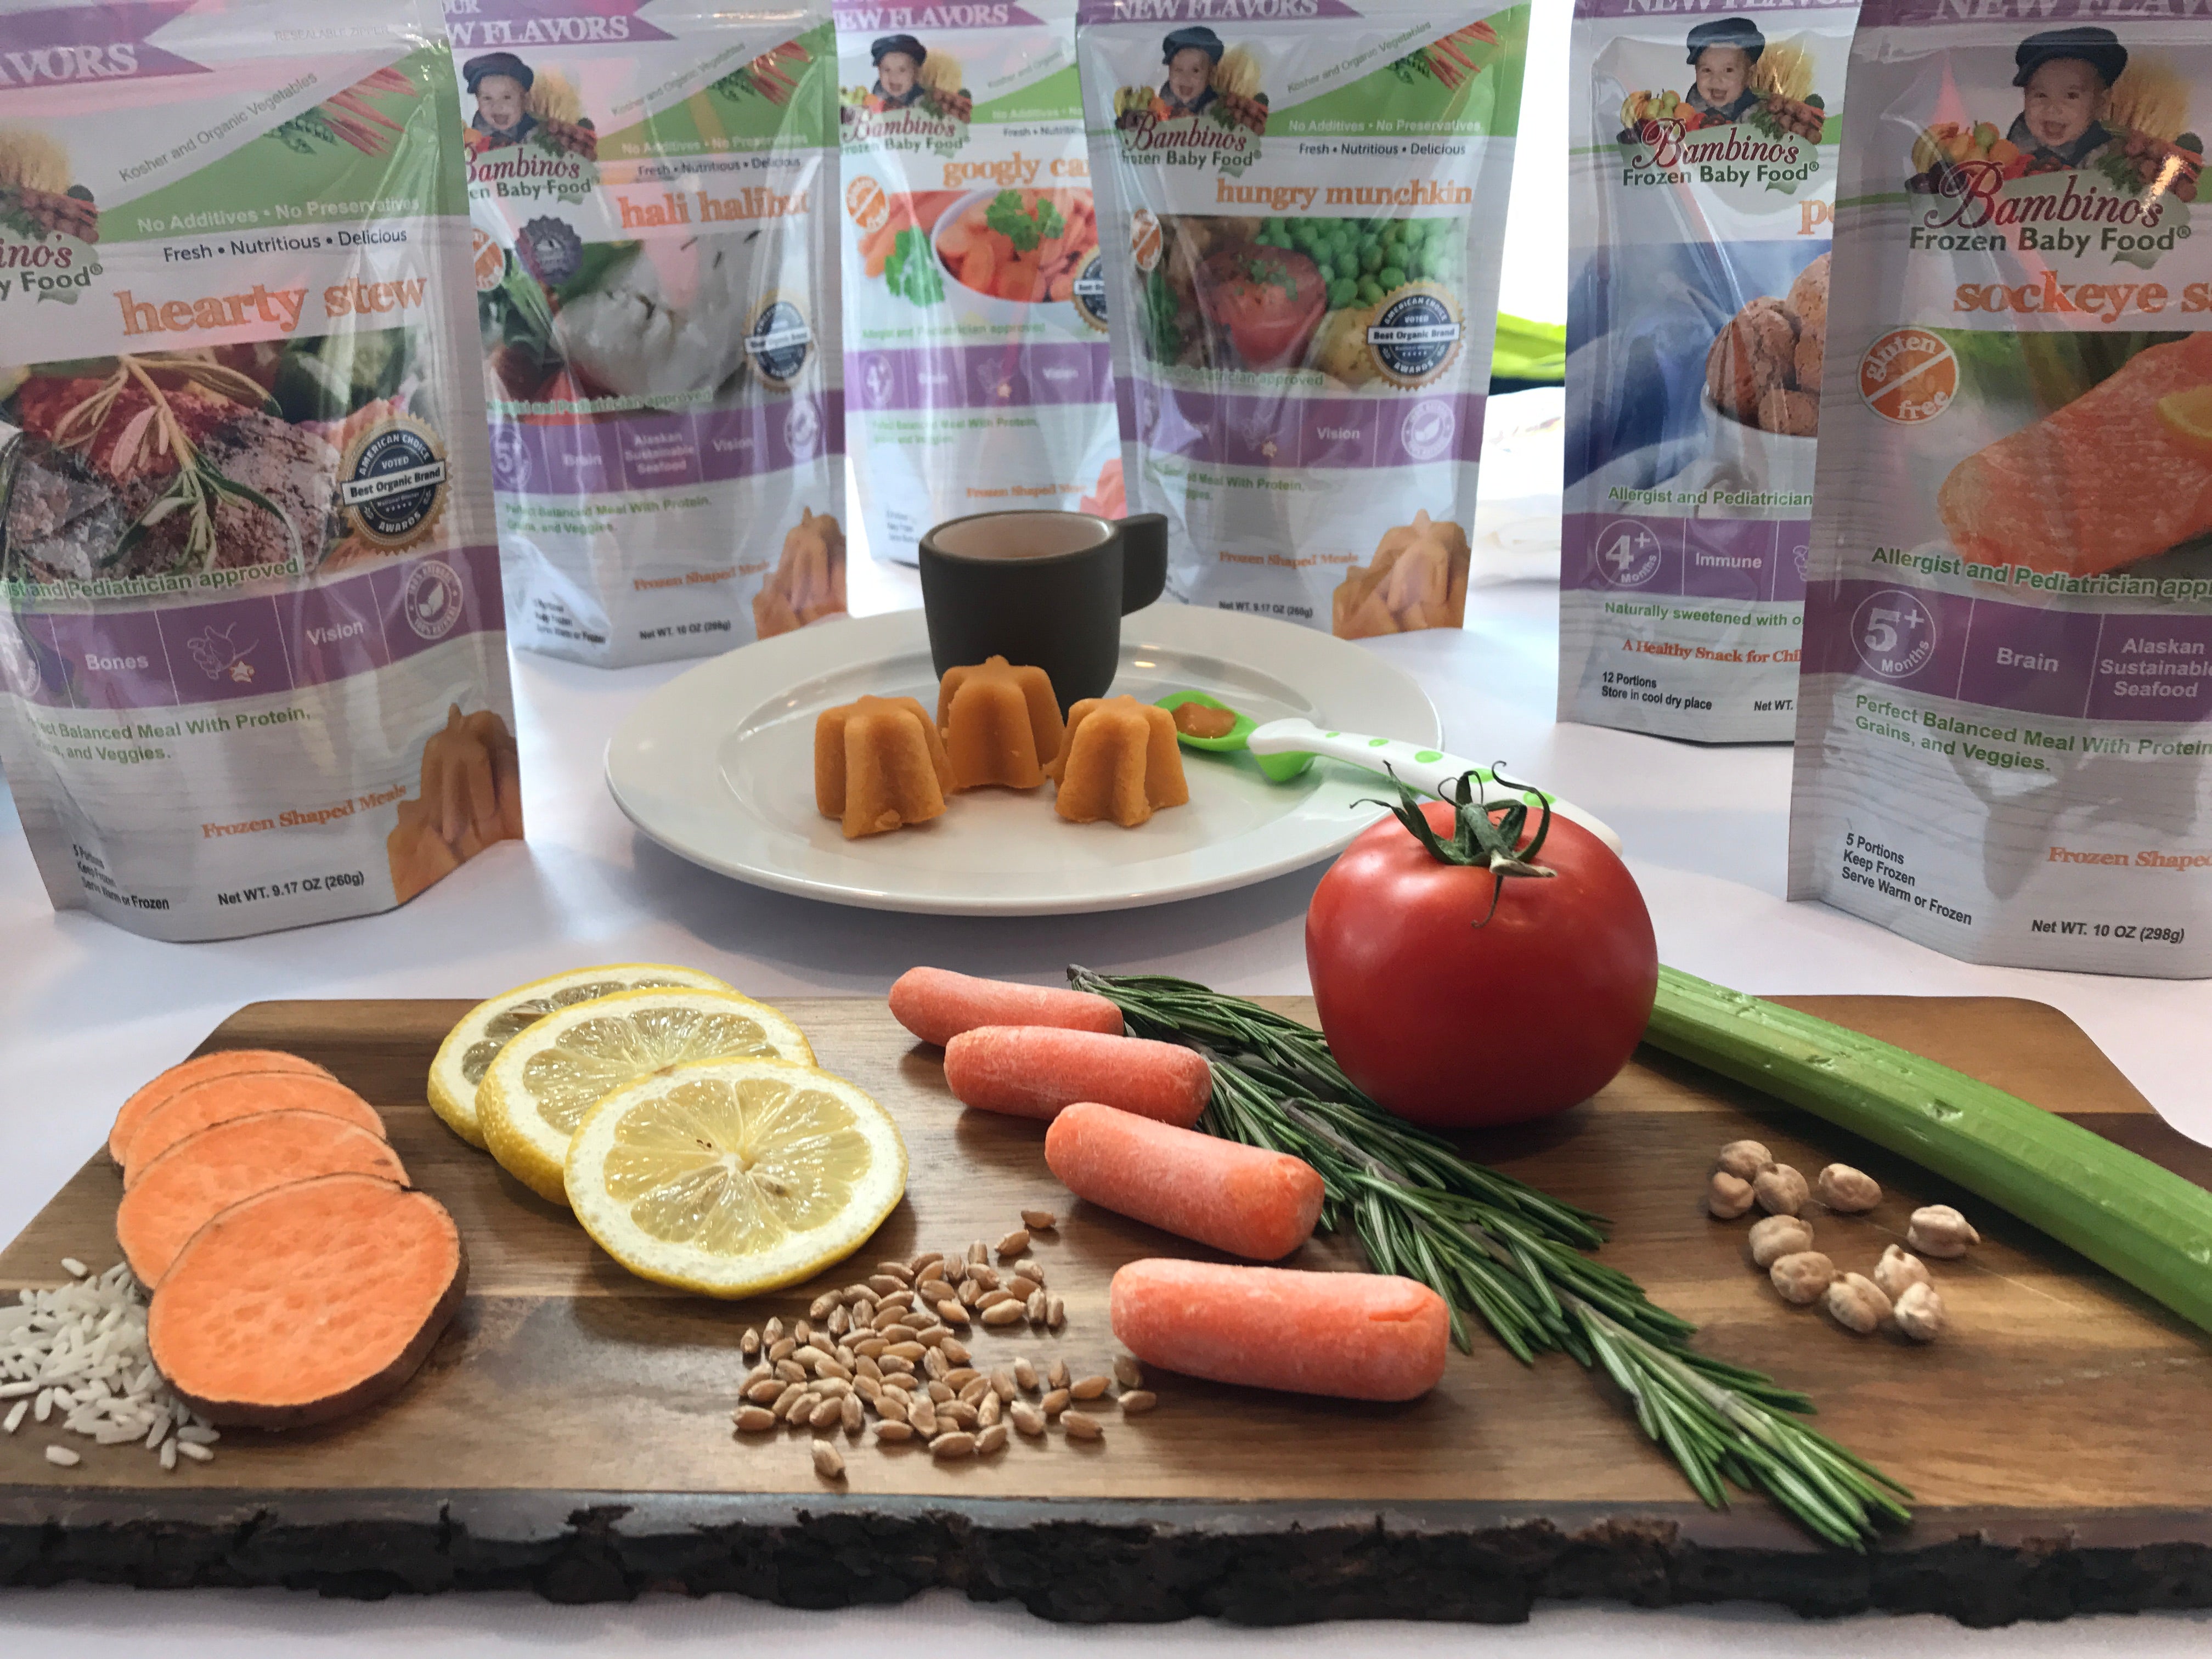 Bambinos Baby Infant Toddler Organic Protein vegetable foods. Beef, chicken salmon halibut carrot celery tomato puree solid kosher meals home delivery  